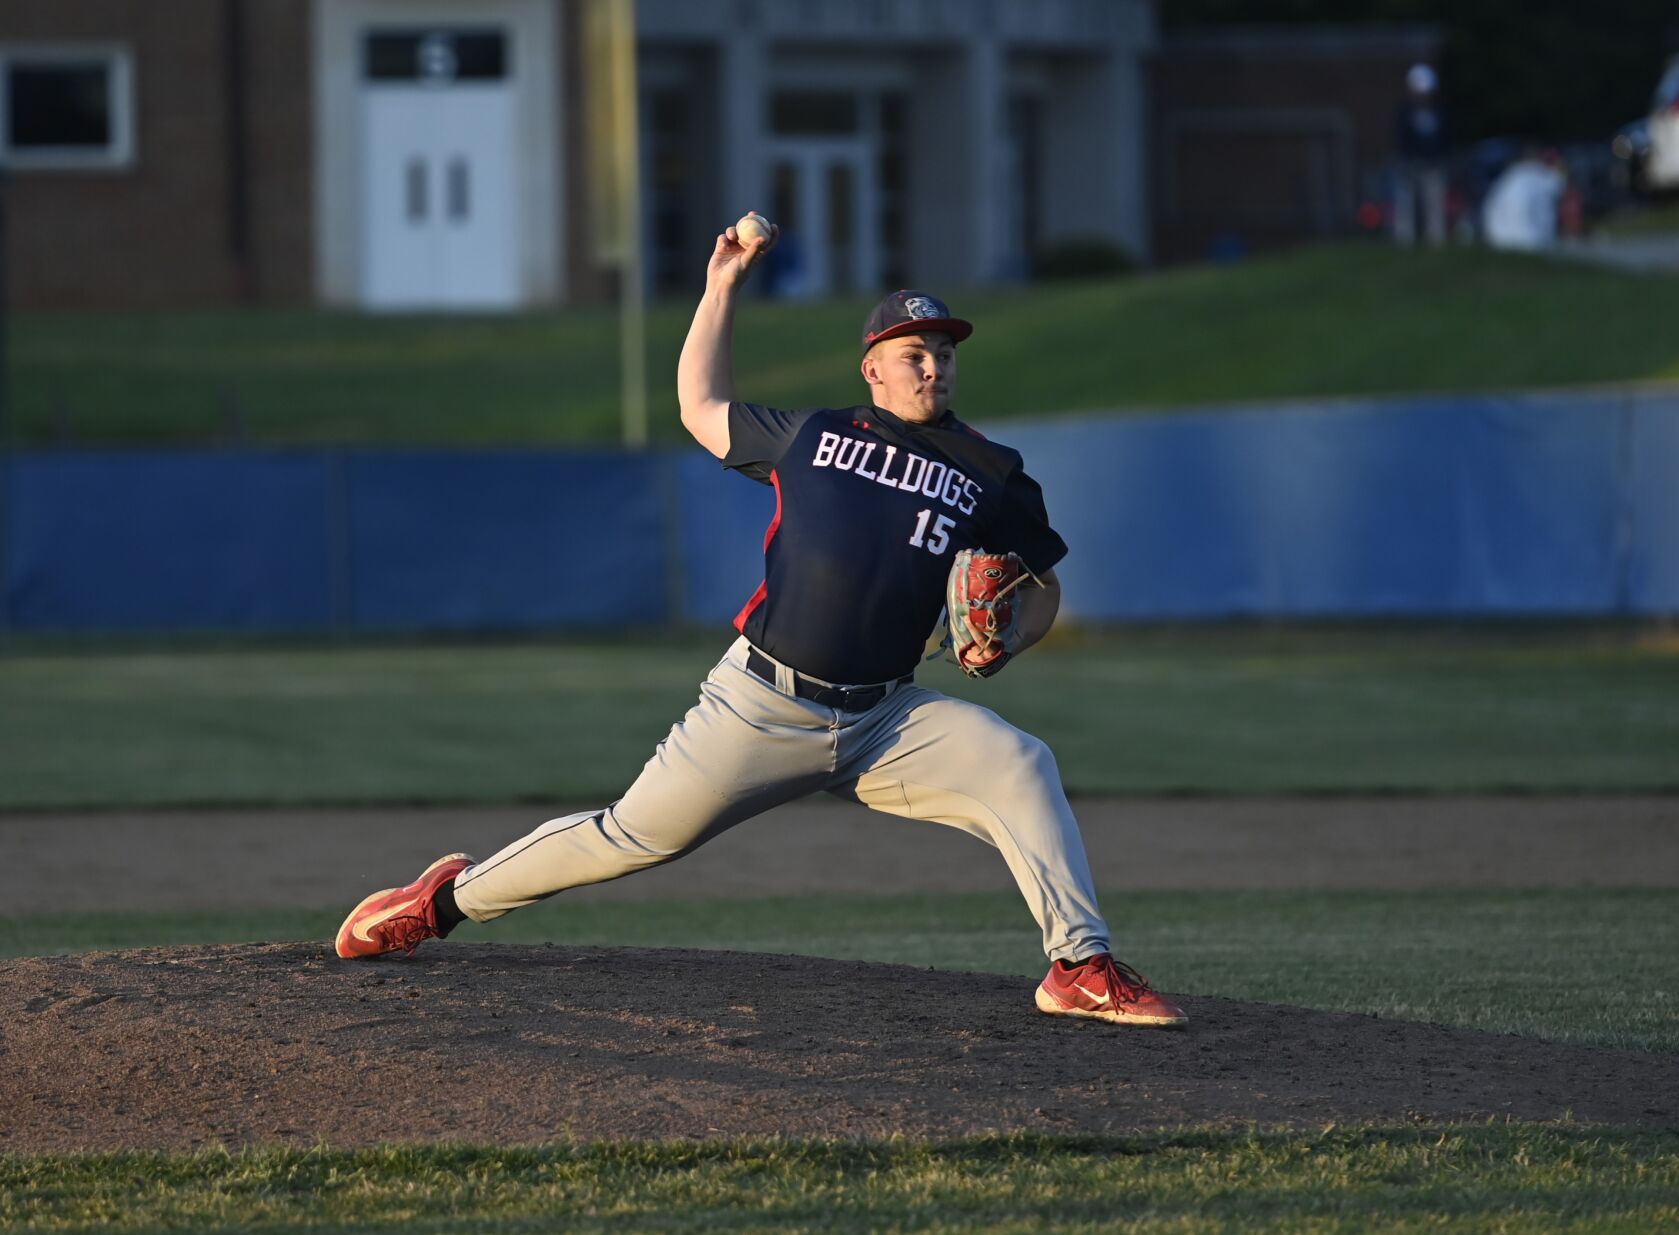 LCA defeats Glass in thrilling extra-inning game; Weaver leads Bulldogs to district title with 9-5 win